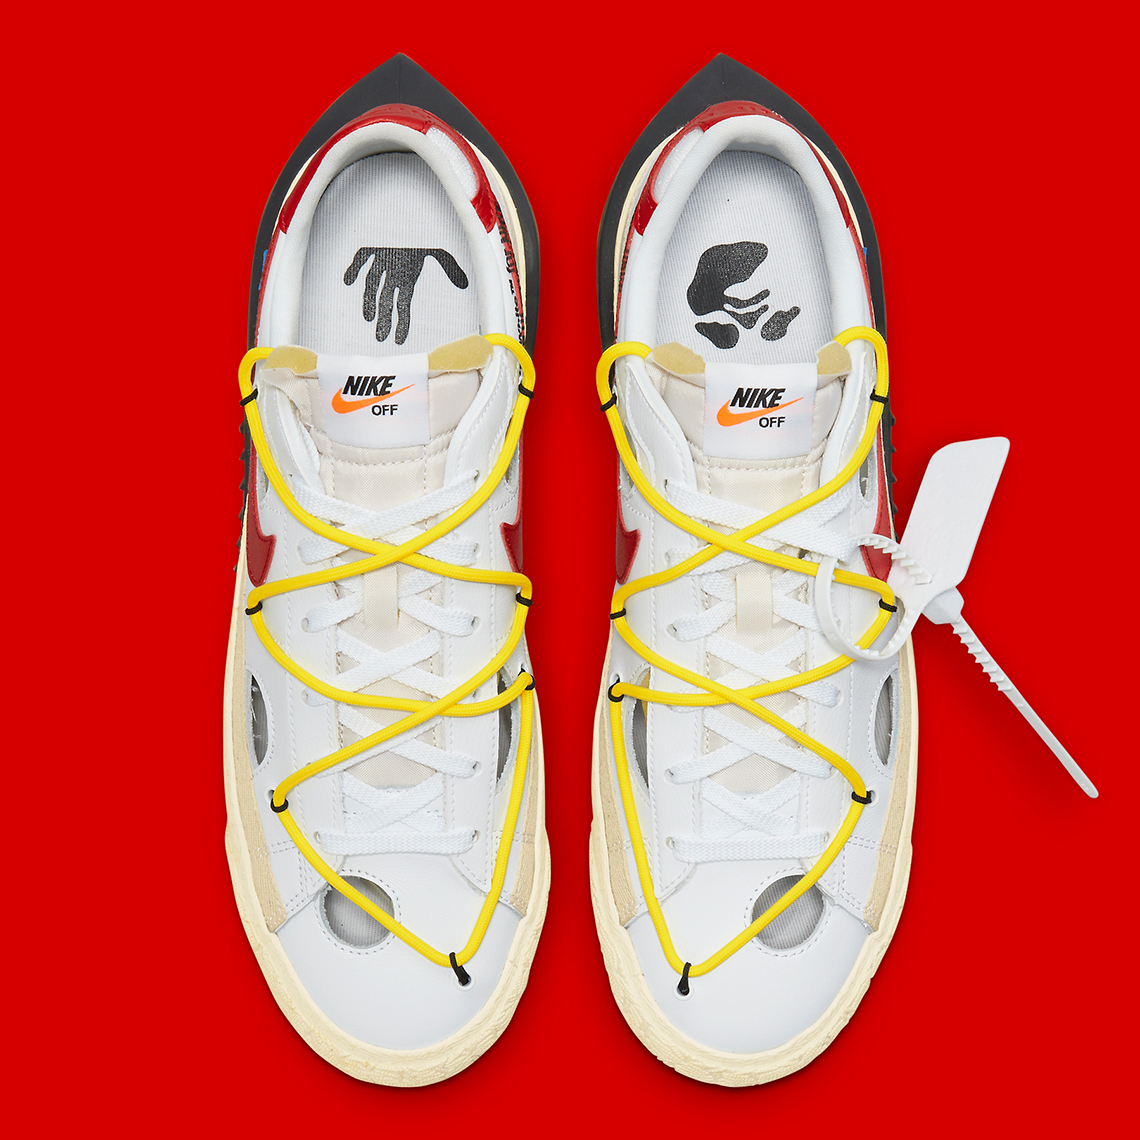 Off-White Nike Blazer Low DH7863-100 DH7863-001 Release Date 